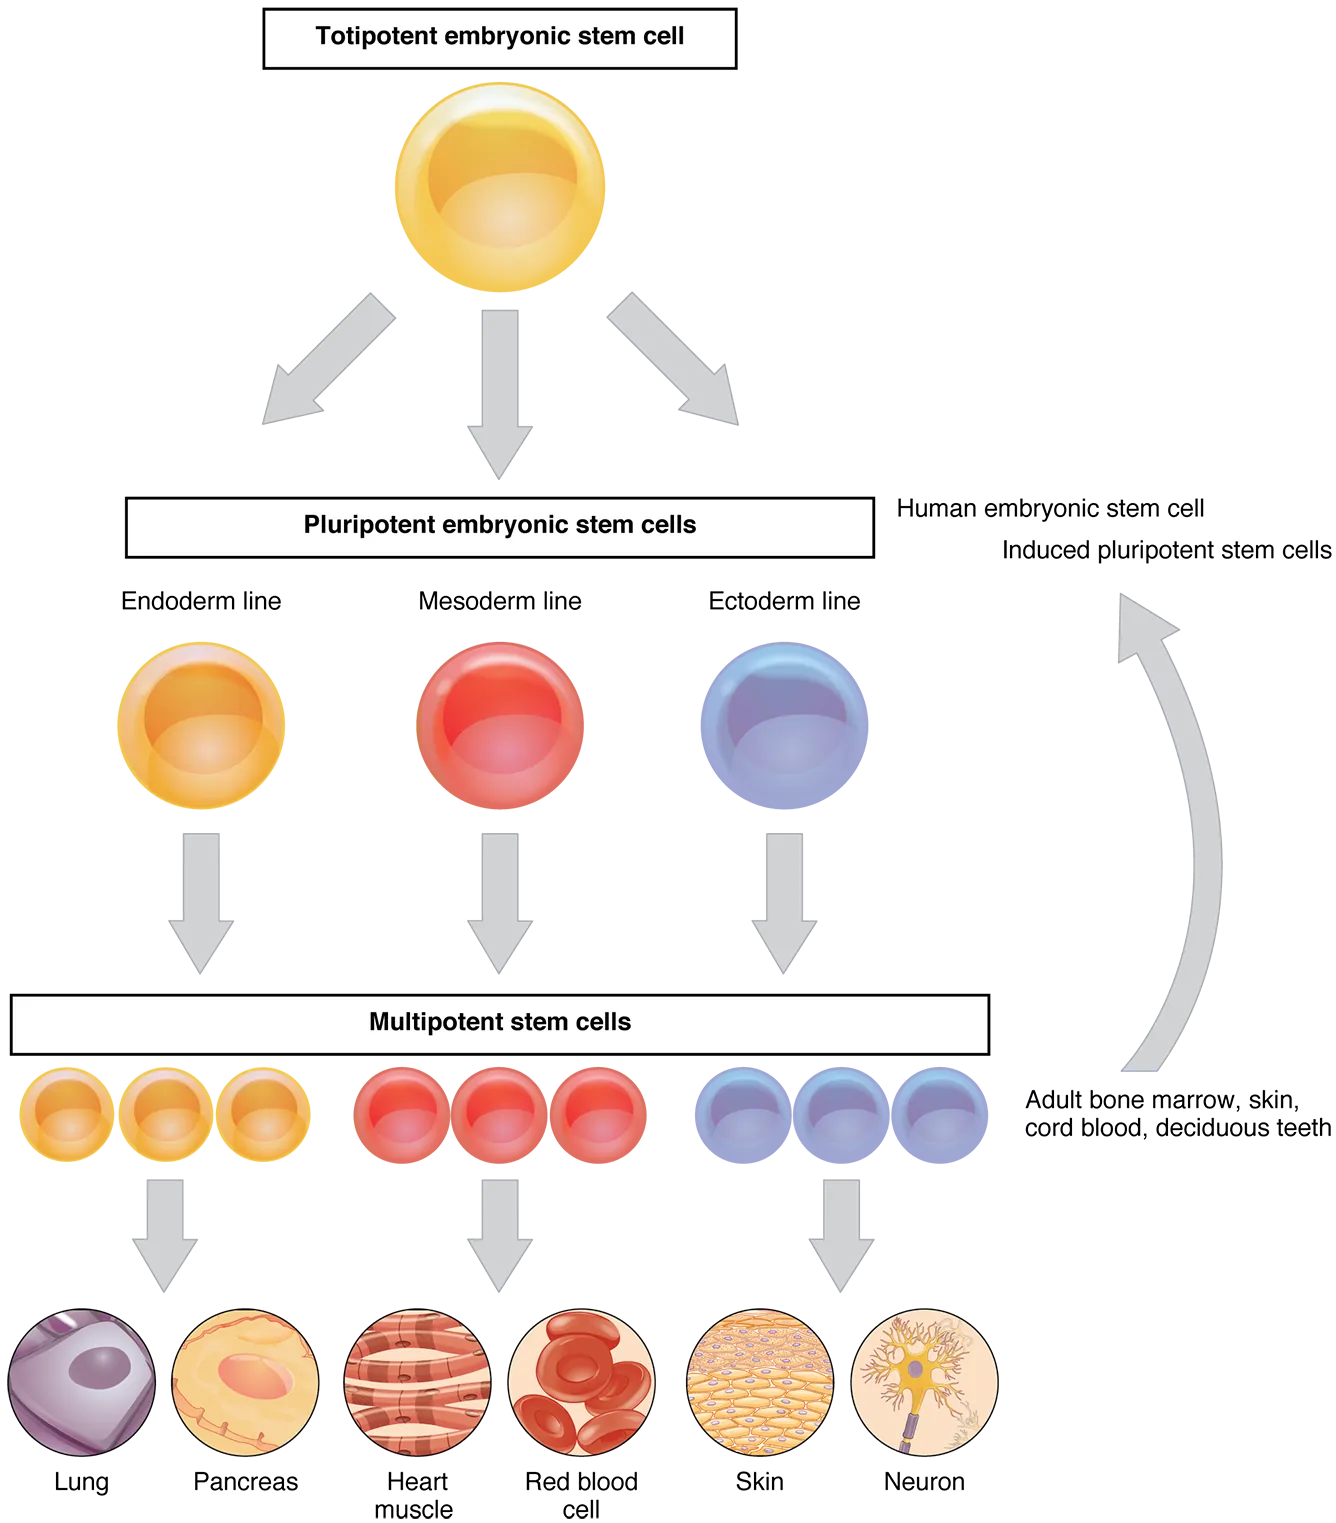 This flow chart shows the differentiation of stem cells into different cell types. The top layer shows a totipotent stem cell, which becomes a pluripotent stem cell and then a multipotent stem cell. A multipotent stem cell can then differentiate into different cell types.